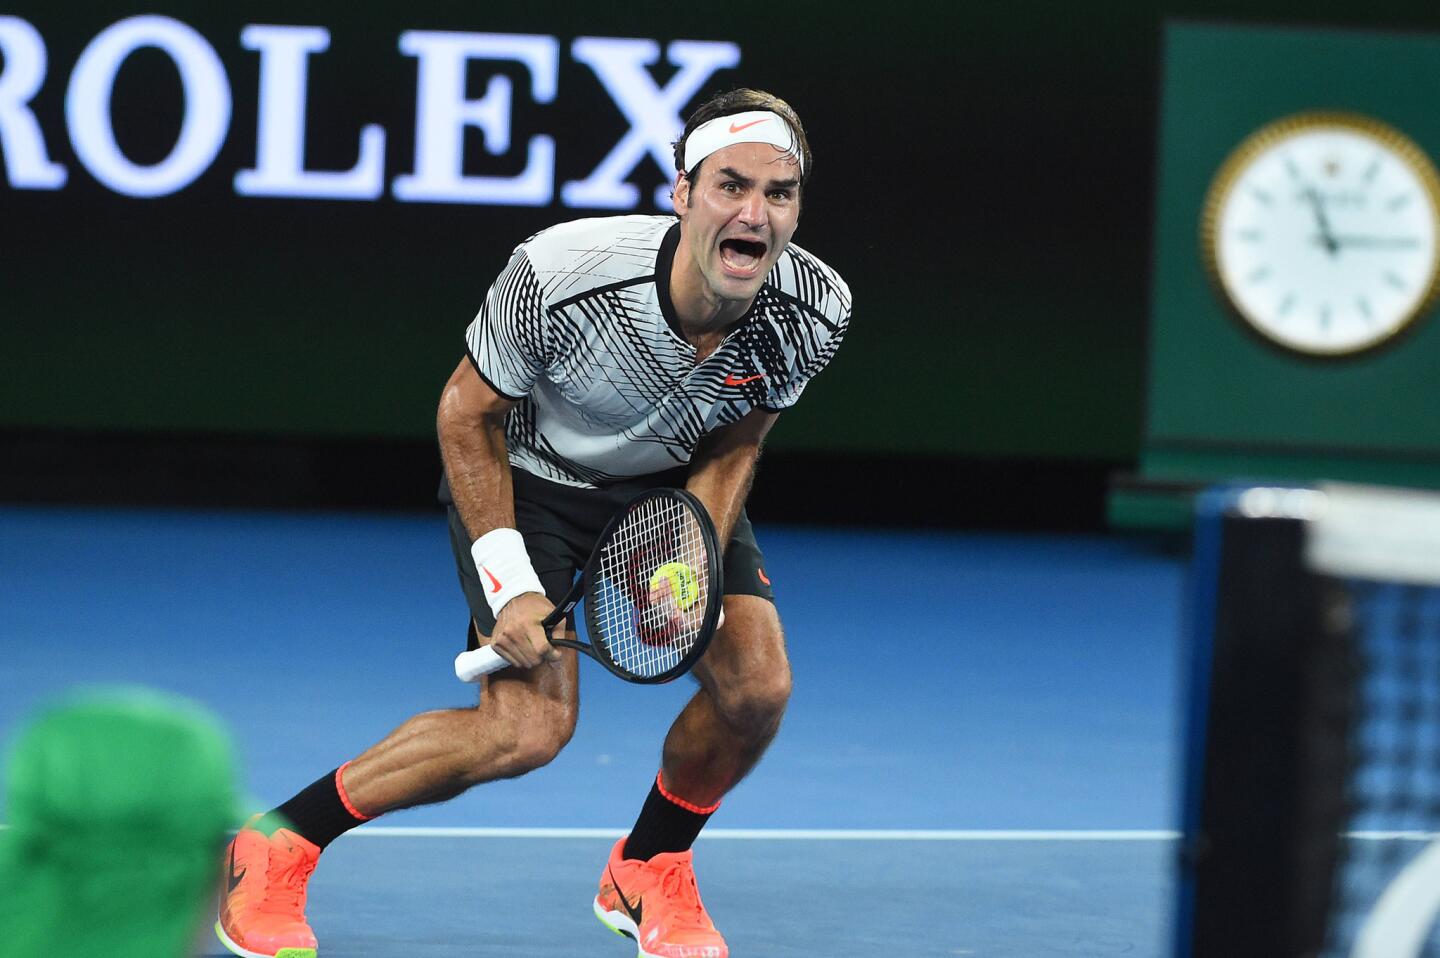 Roger Federer wins his 18th grand slam singles title against Rafael Nadal on Sunday, Jan. 29, 2017 at the 2017 Australian Open at Melbourne Park in Melbourne, Australia. (Corinne Dubreuil/Abaca Press/TNS) ** OUTS - ELSENT, FPG, TCN - OUTS **